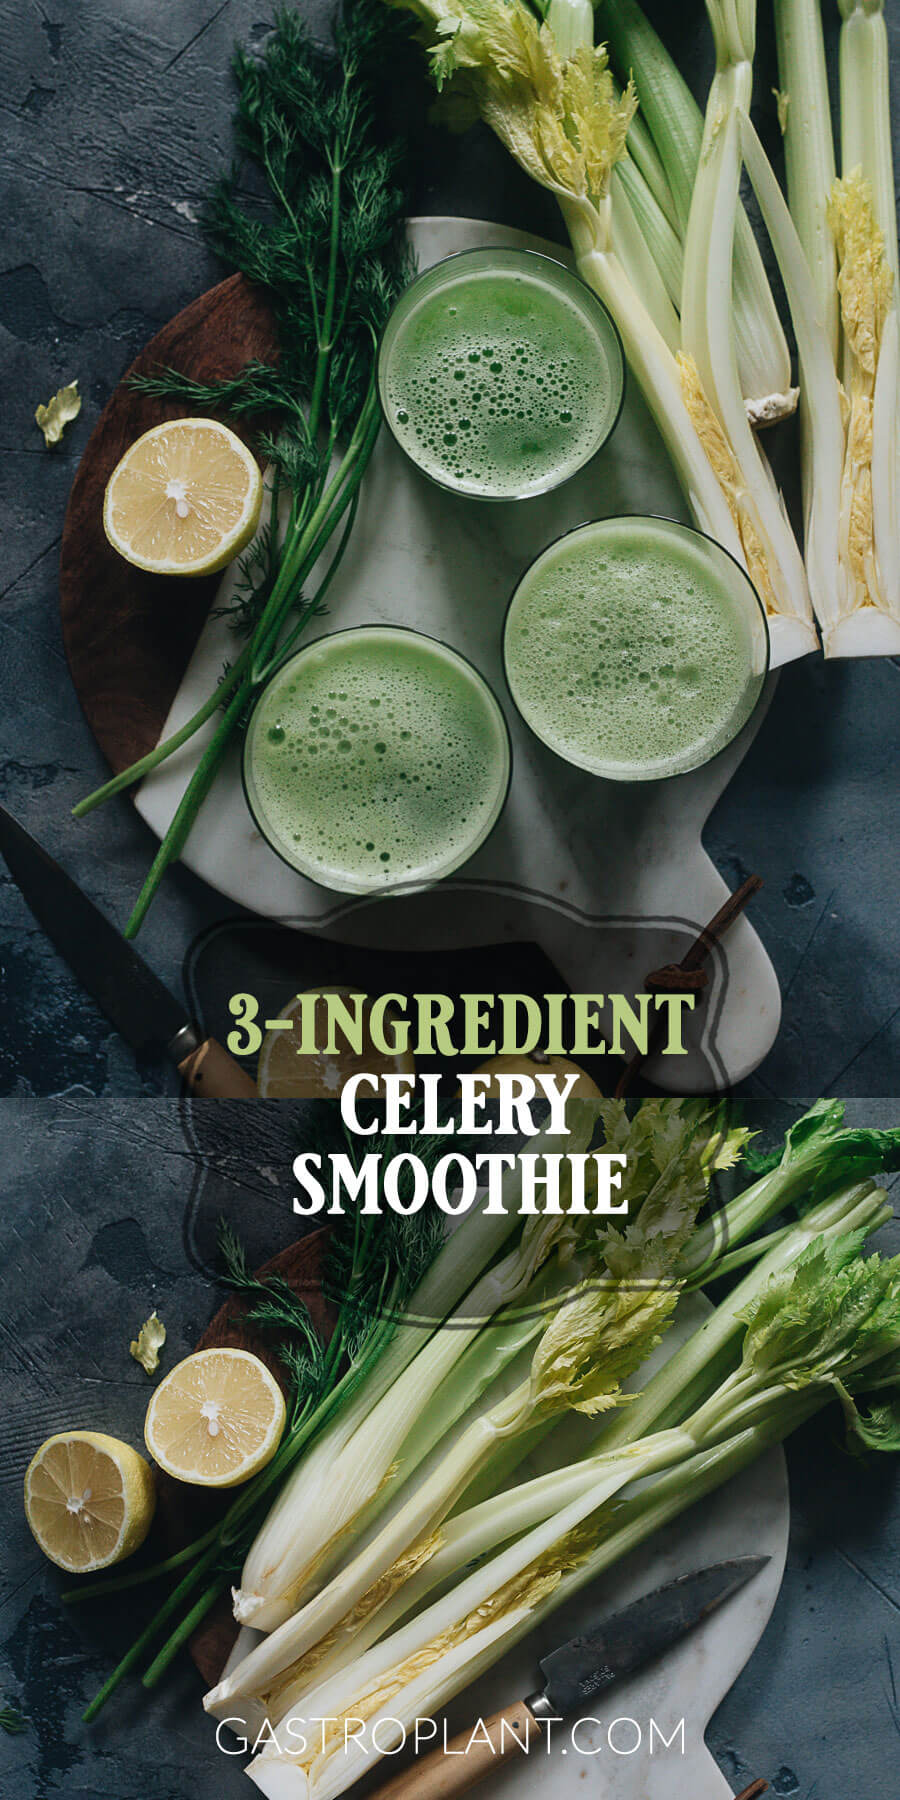 Easy quick 3-ingredient celery smoothie with fresh ingredients